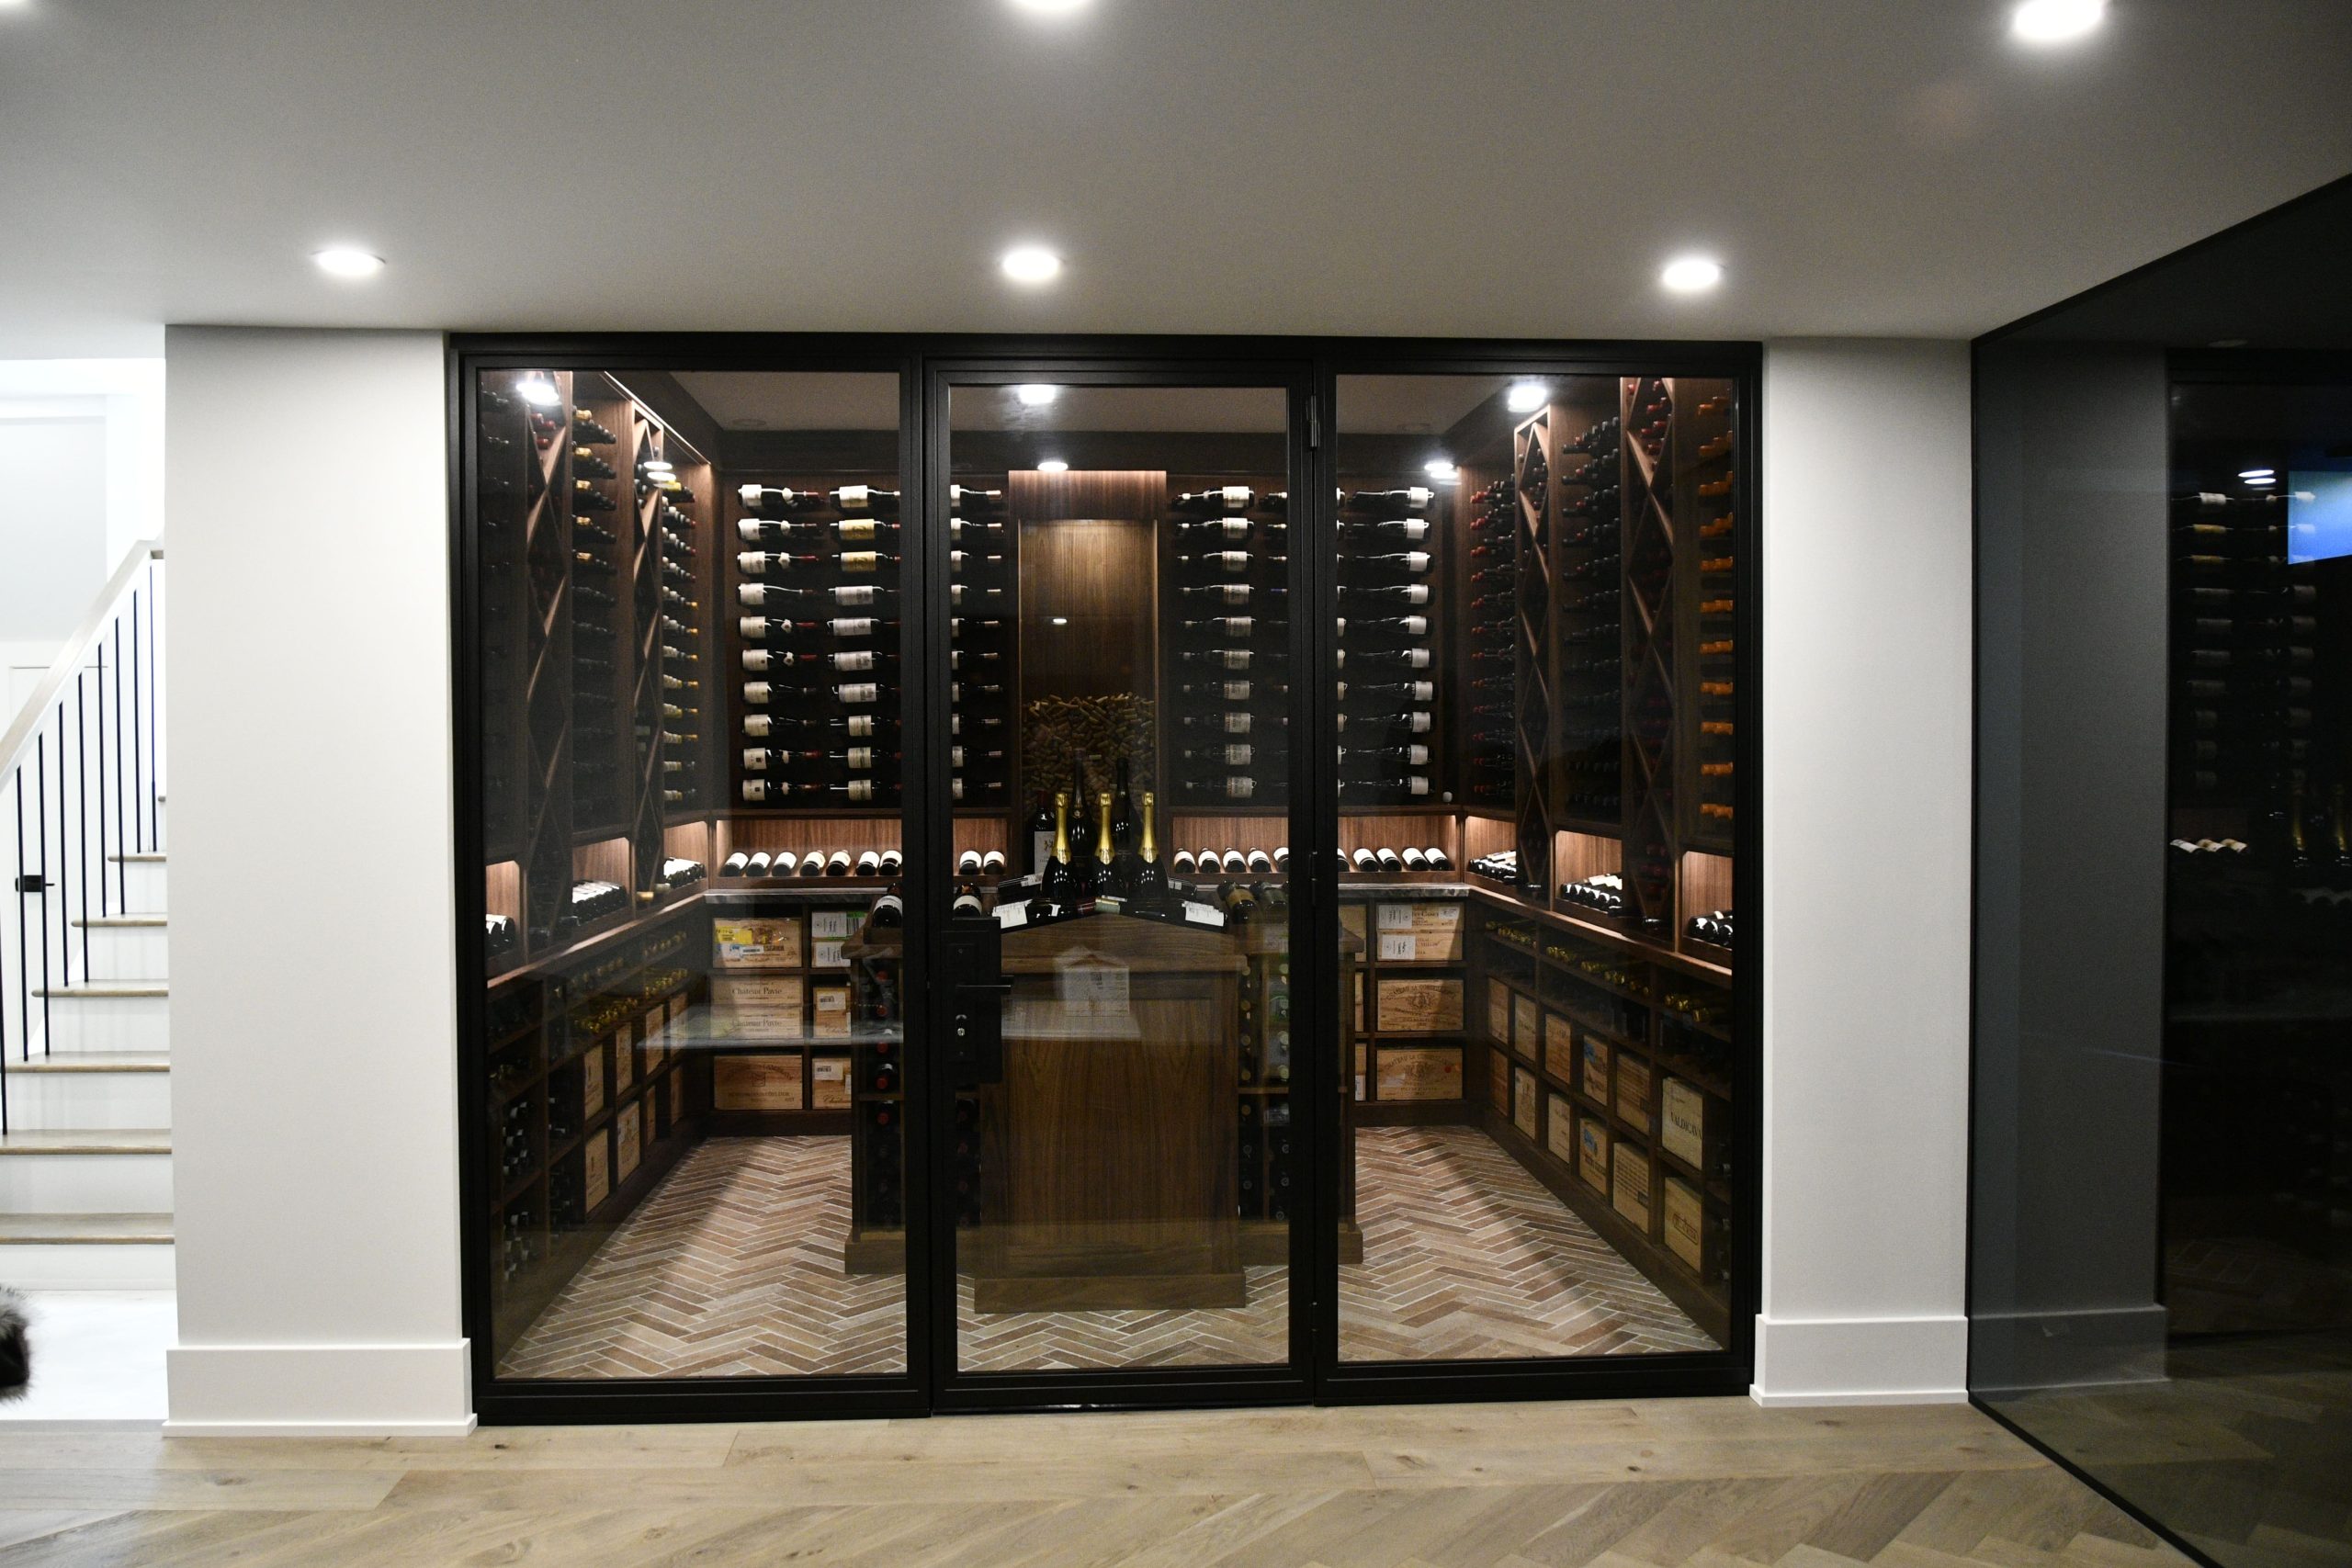 Premium wines preserved in a glass sealed home wine cellar.